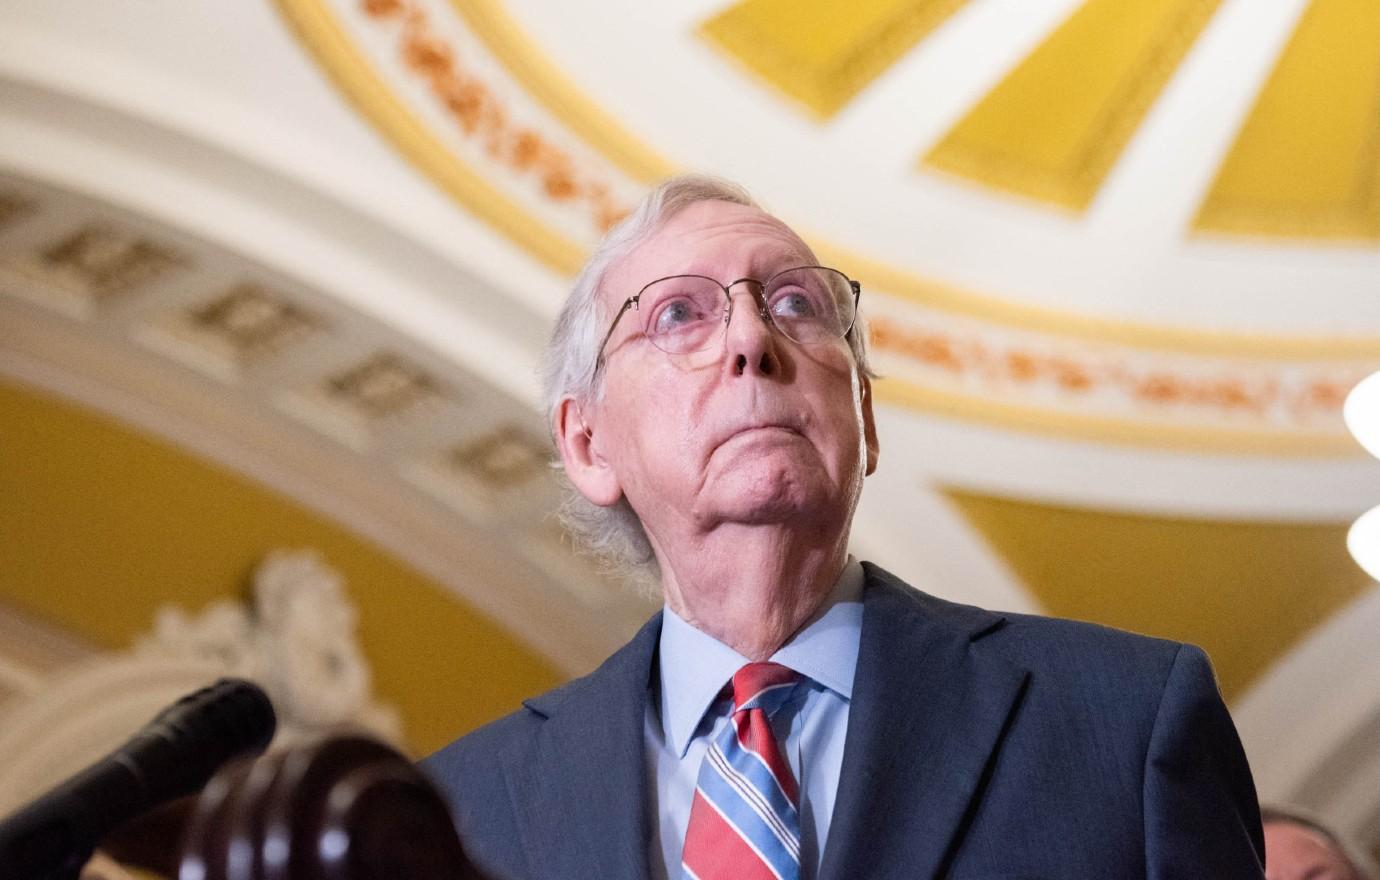 Mitch McConnell Is Fine After Freezing Up At Press Conference pic